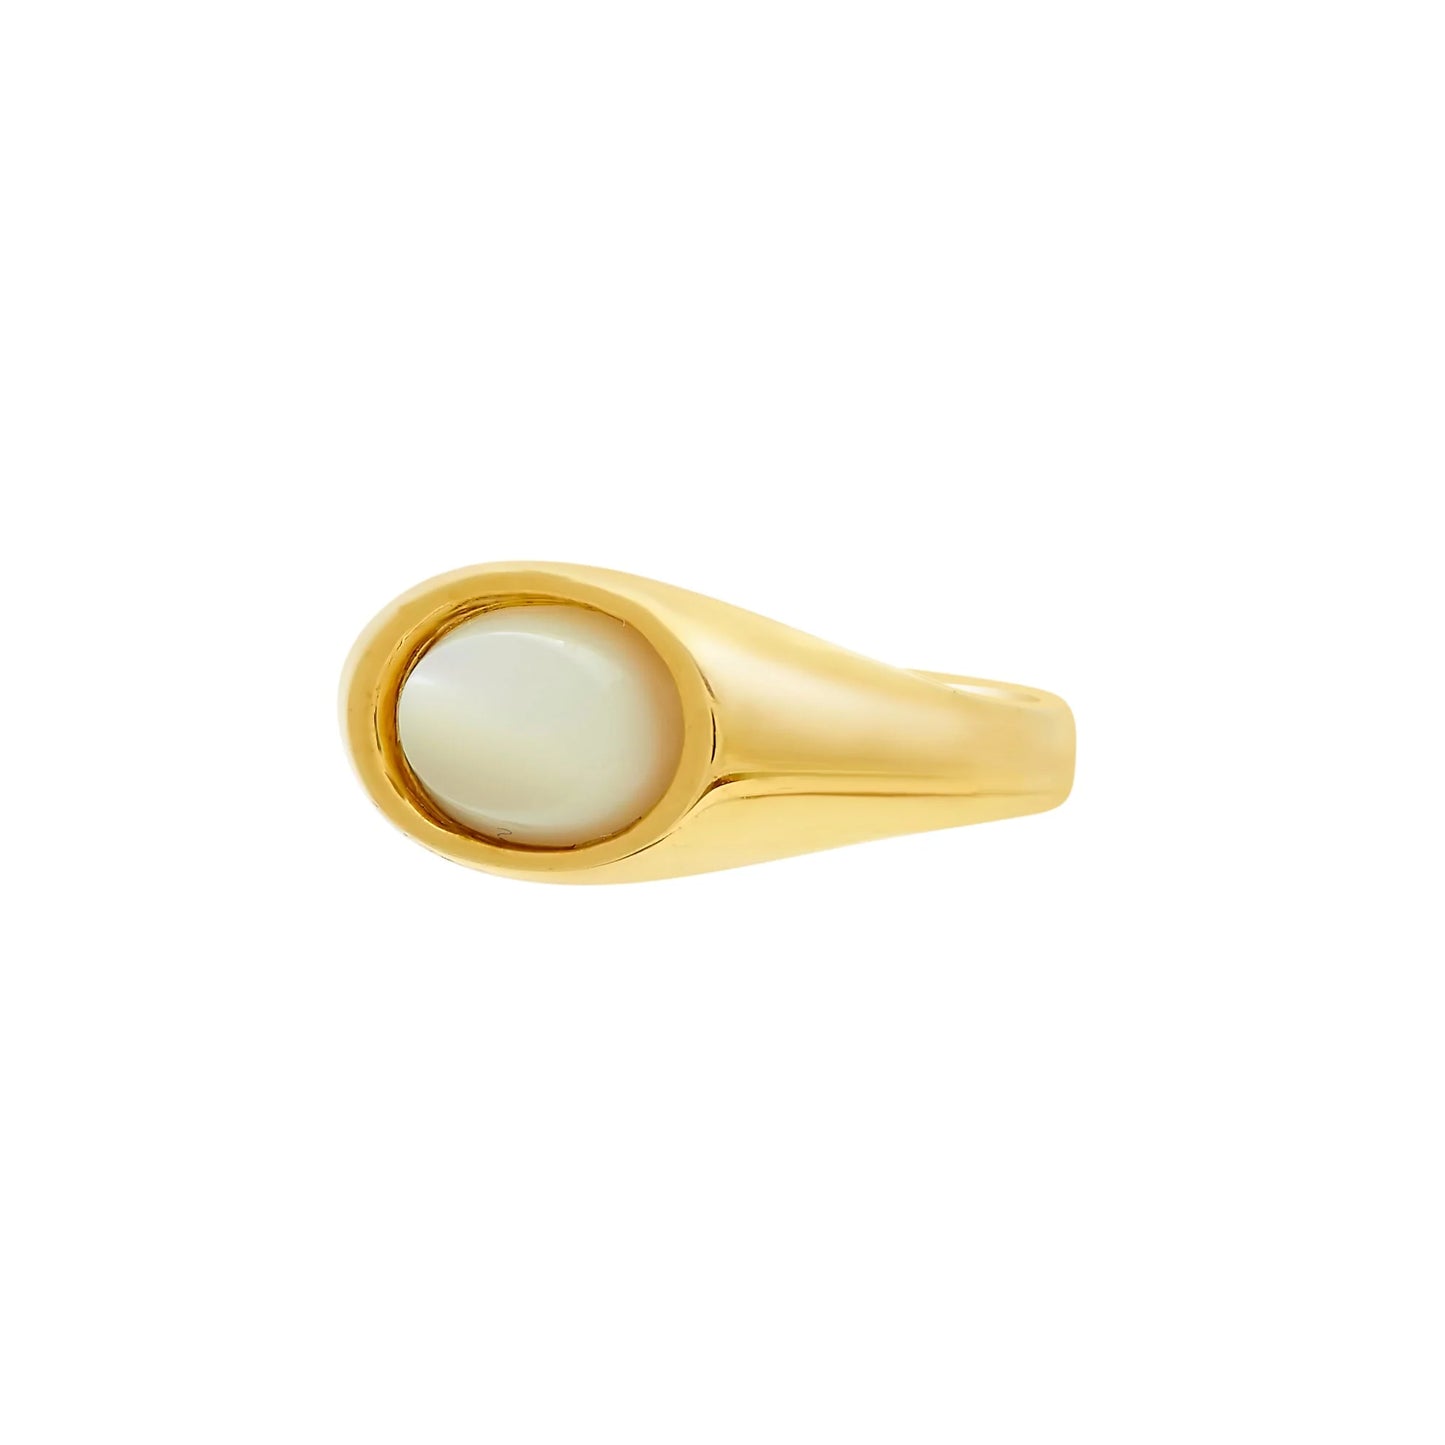 Tarin Thomas Artie Ring - White Mother of Pearl